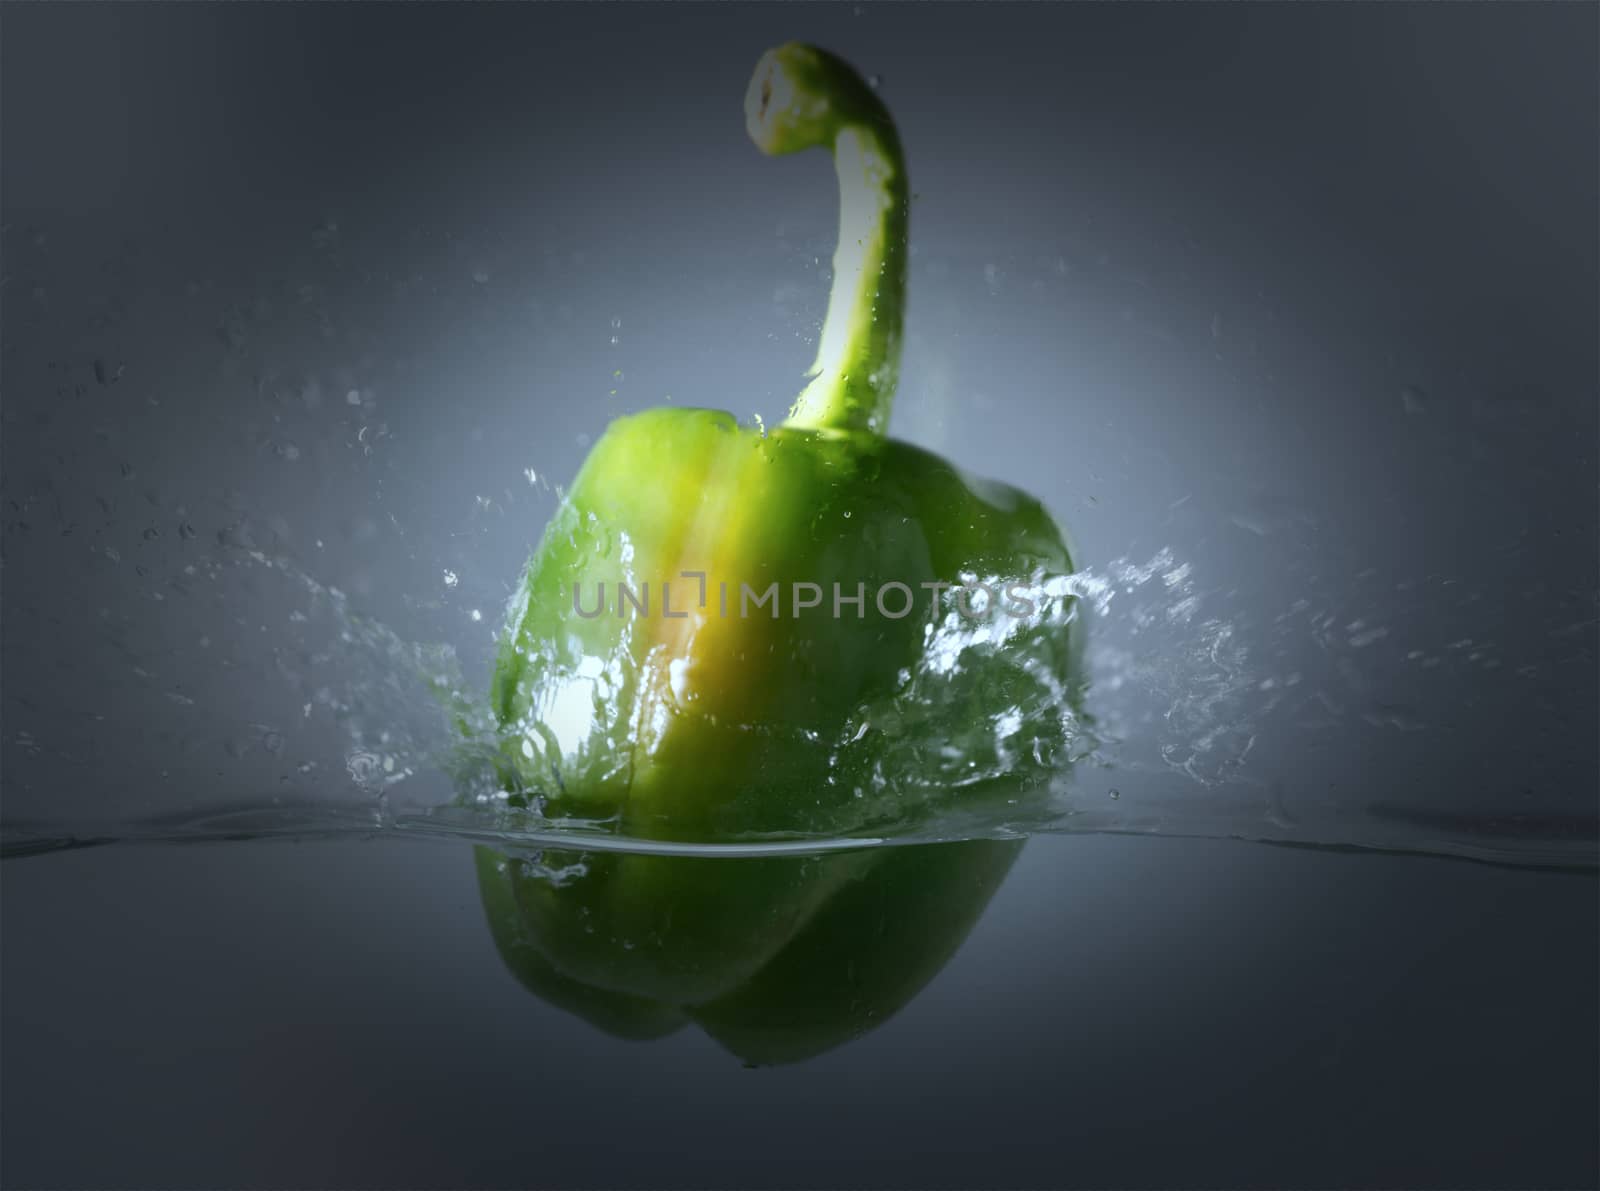 Vintage green bell peppers thrown into the water with a splash of water.